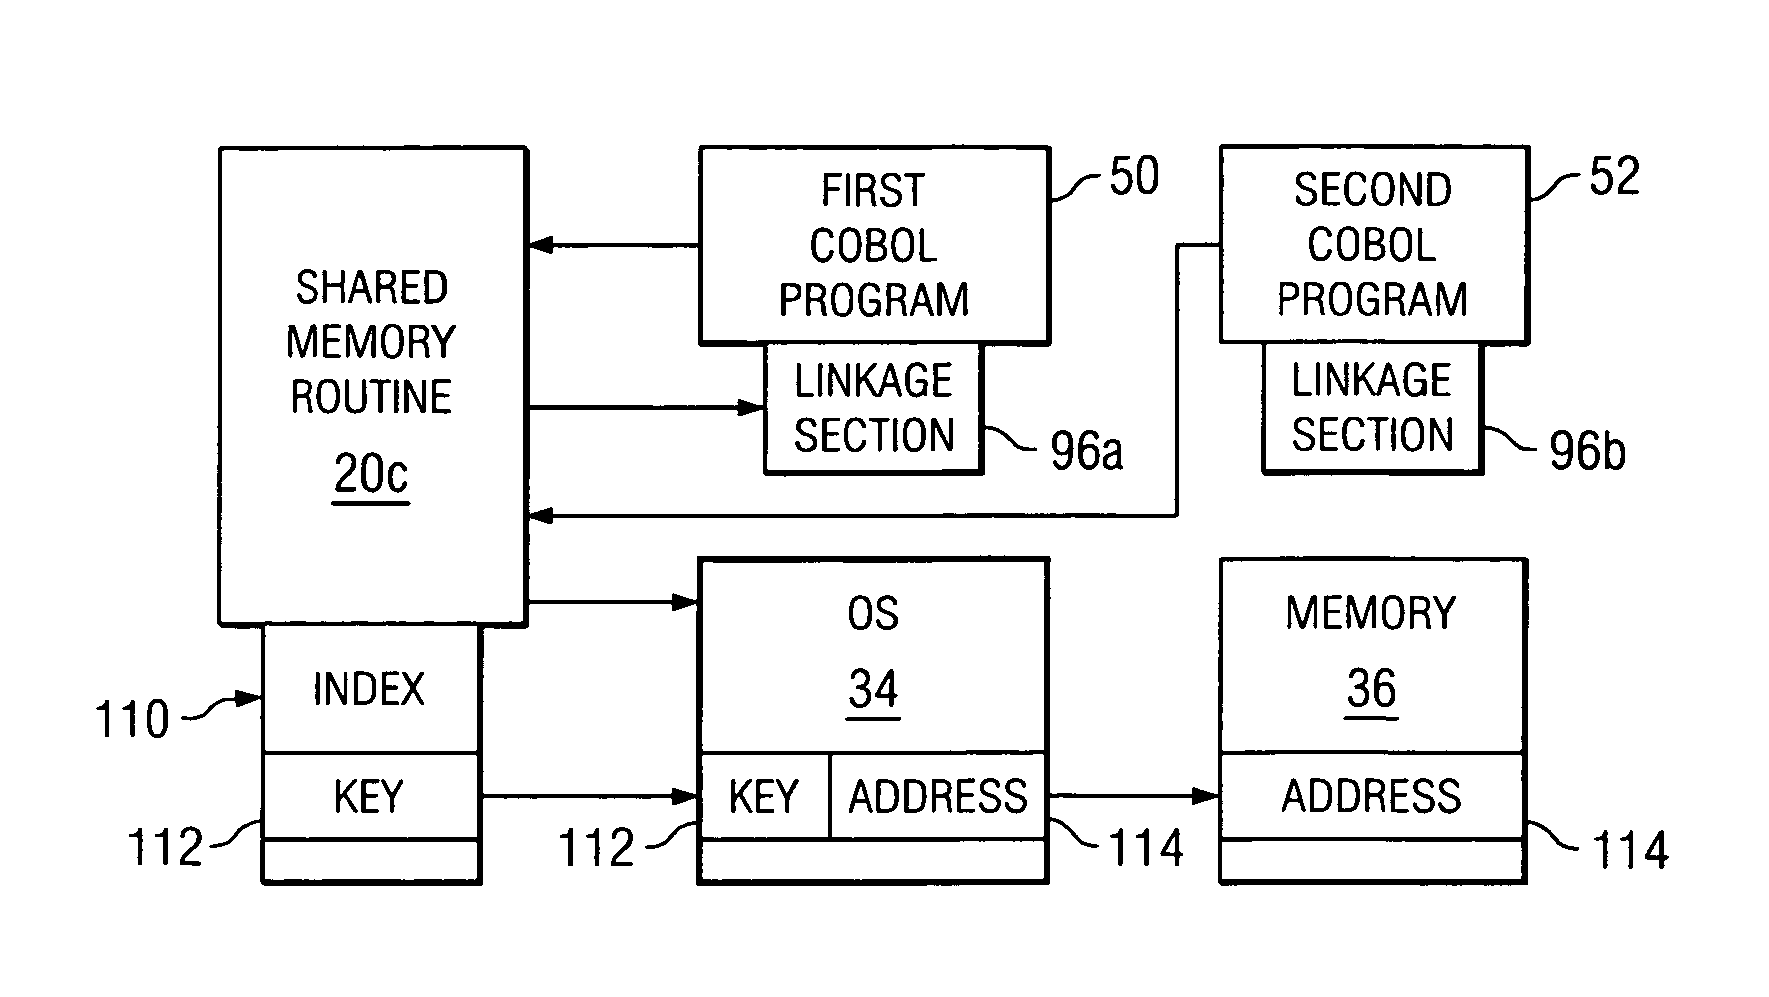 System and method for COBOL to provide shared memory and memory and message queues